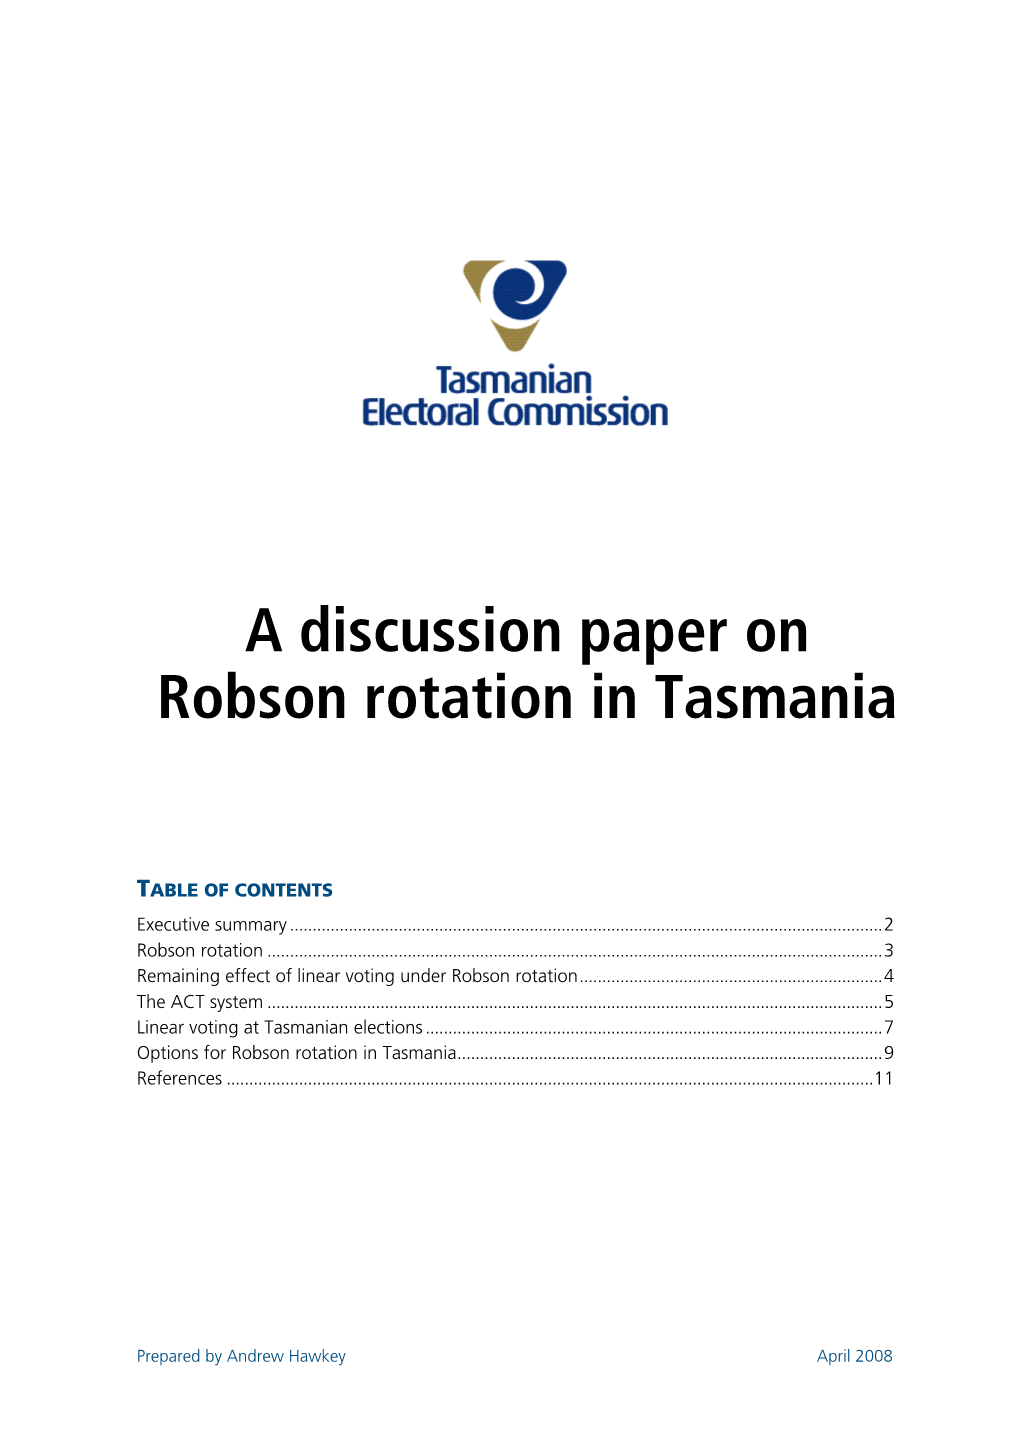 A Discussion Paper on Robson Rotation in Tasmania